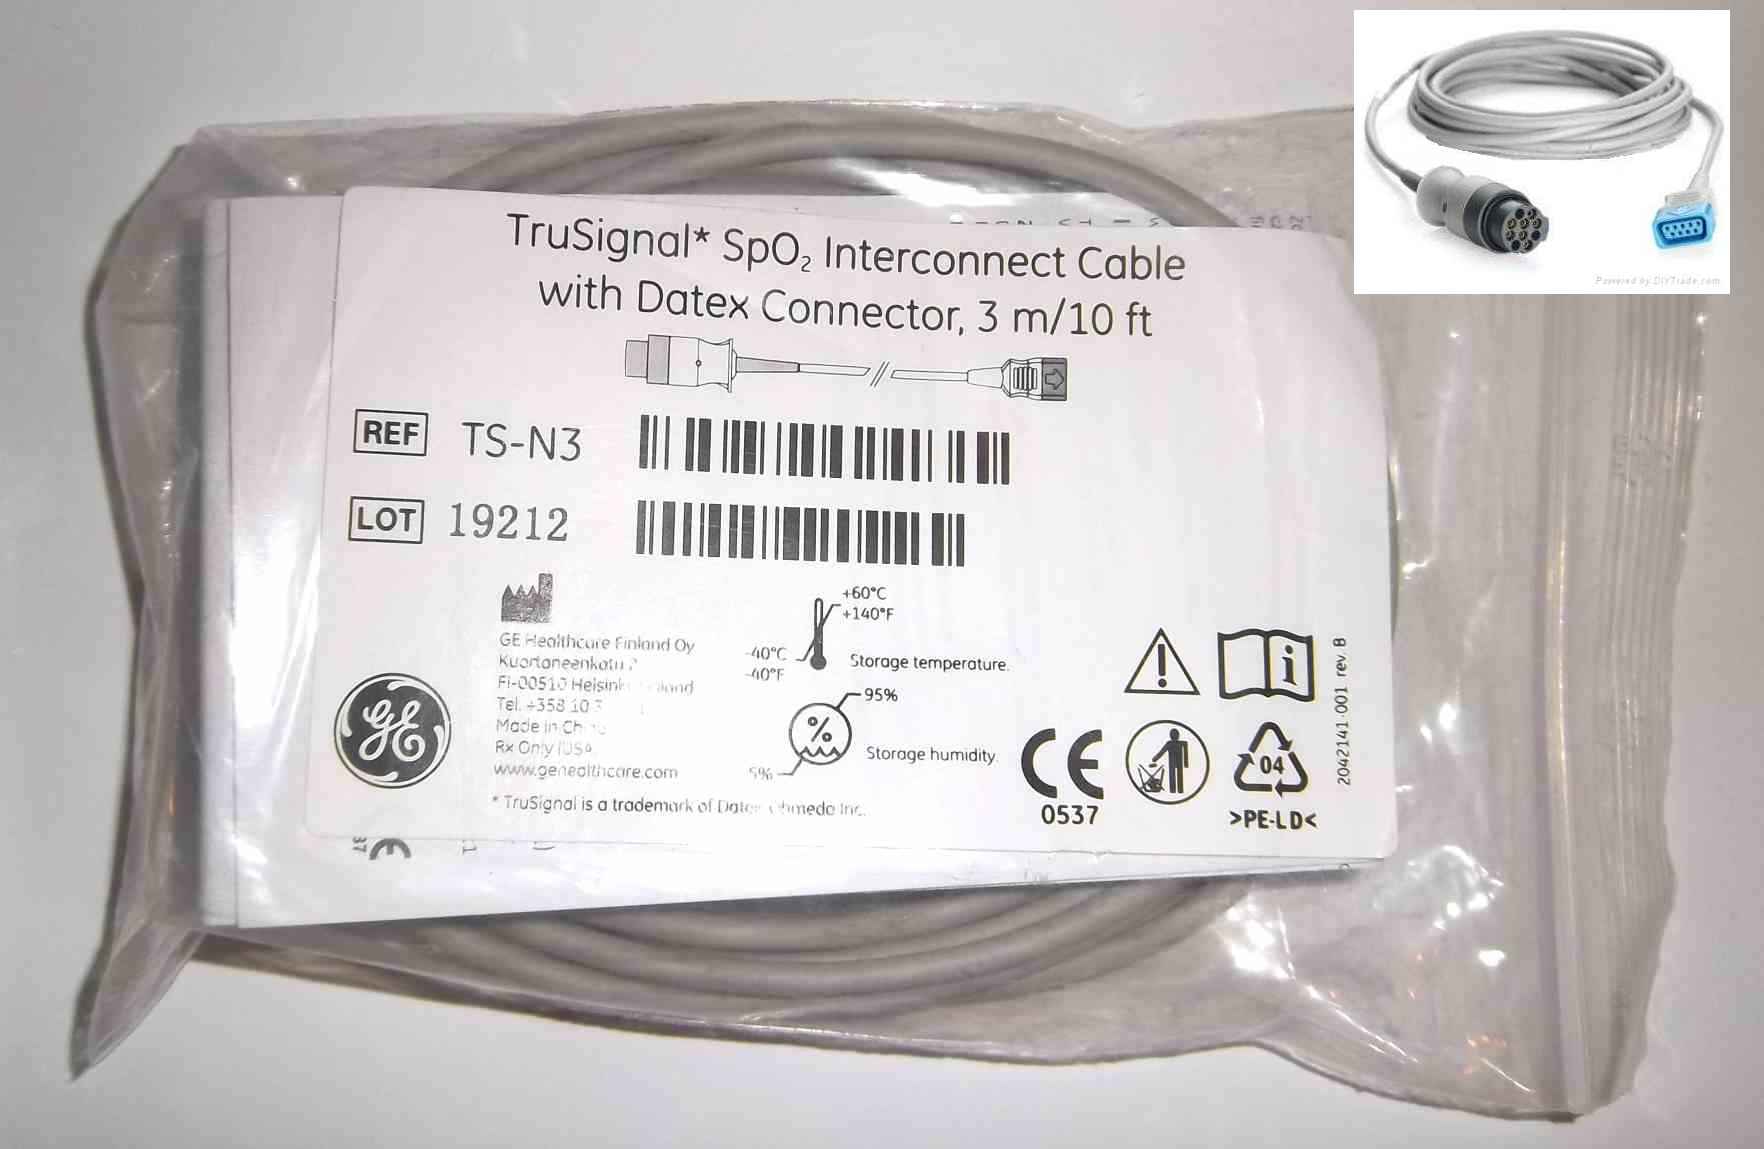 New Interconnect Cable w/ Datex Ohmeda connector cables datex ohmeda GE healthcare